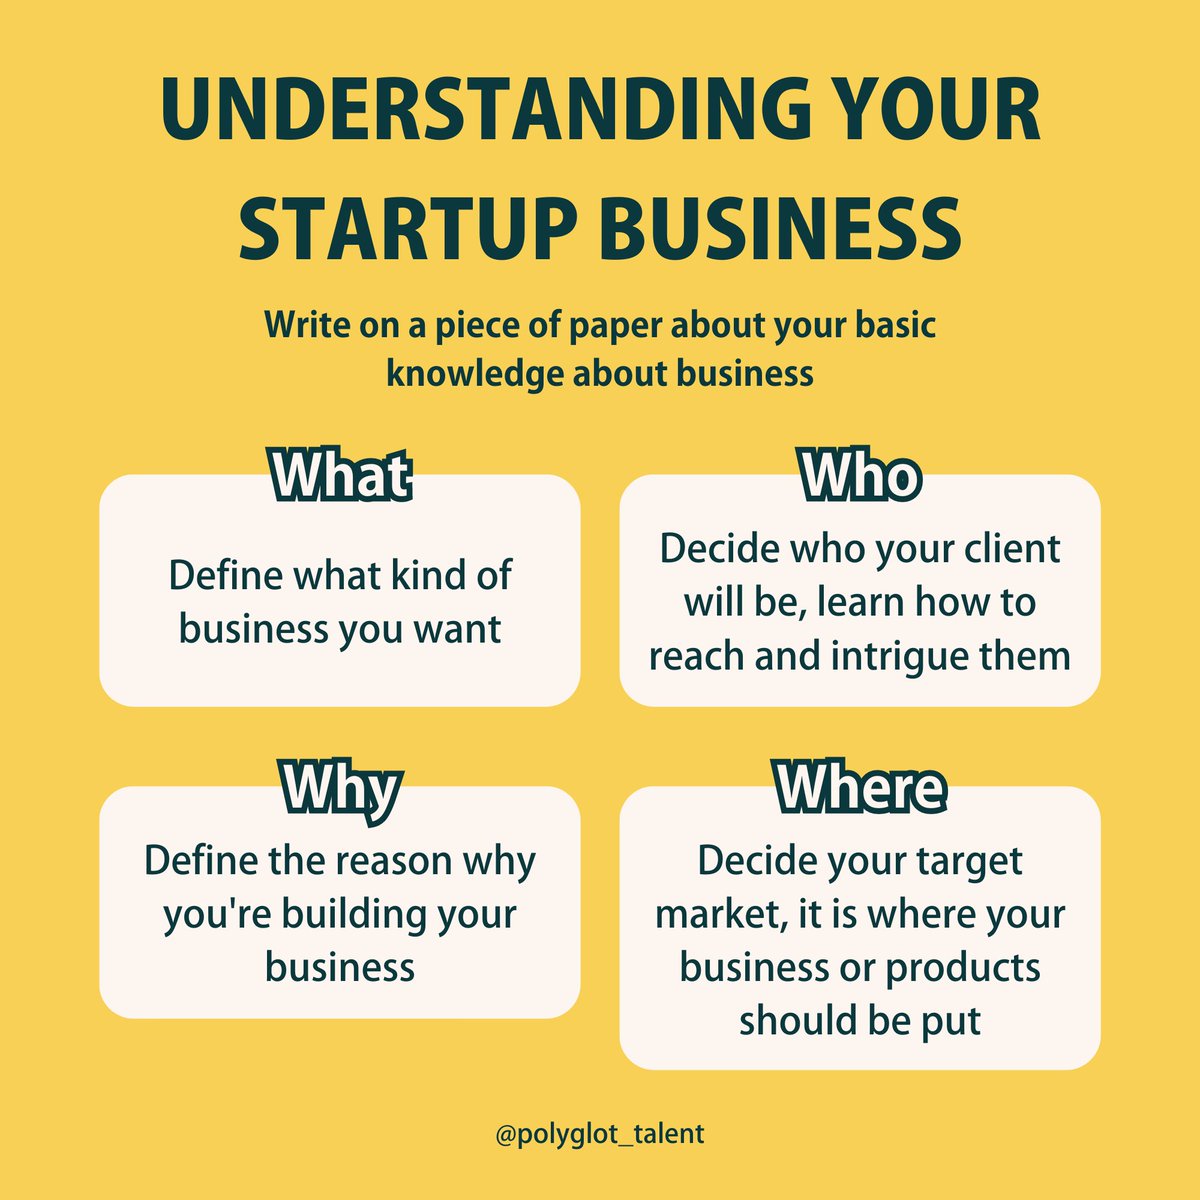 #Startups are just like people - they have goals, needs, and desires. 🌱

So take some time to understand your startup business better!

Here are some key question points that you should consider brainstorming on as a #startupbusiness owner! ✍️ #startupfounder #businessknowledge